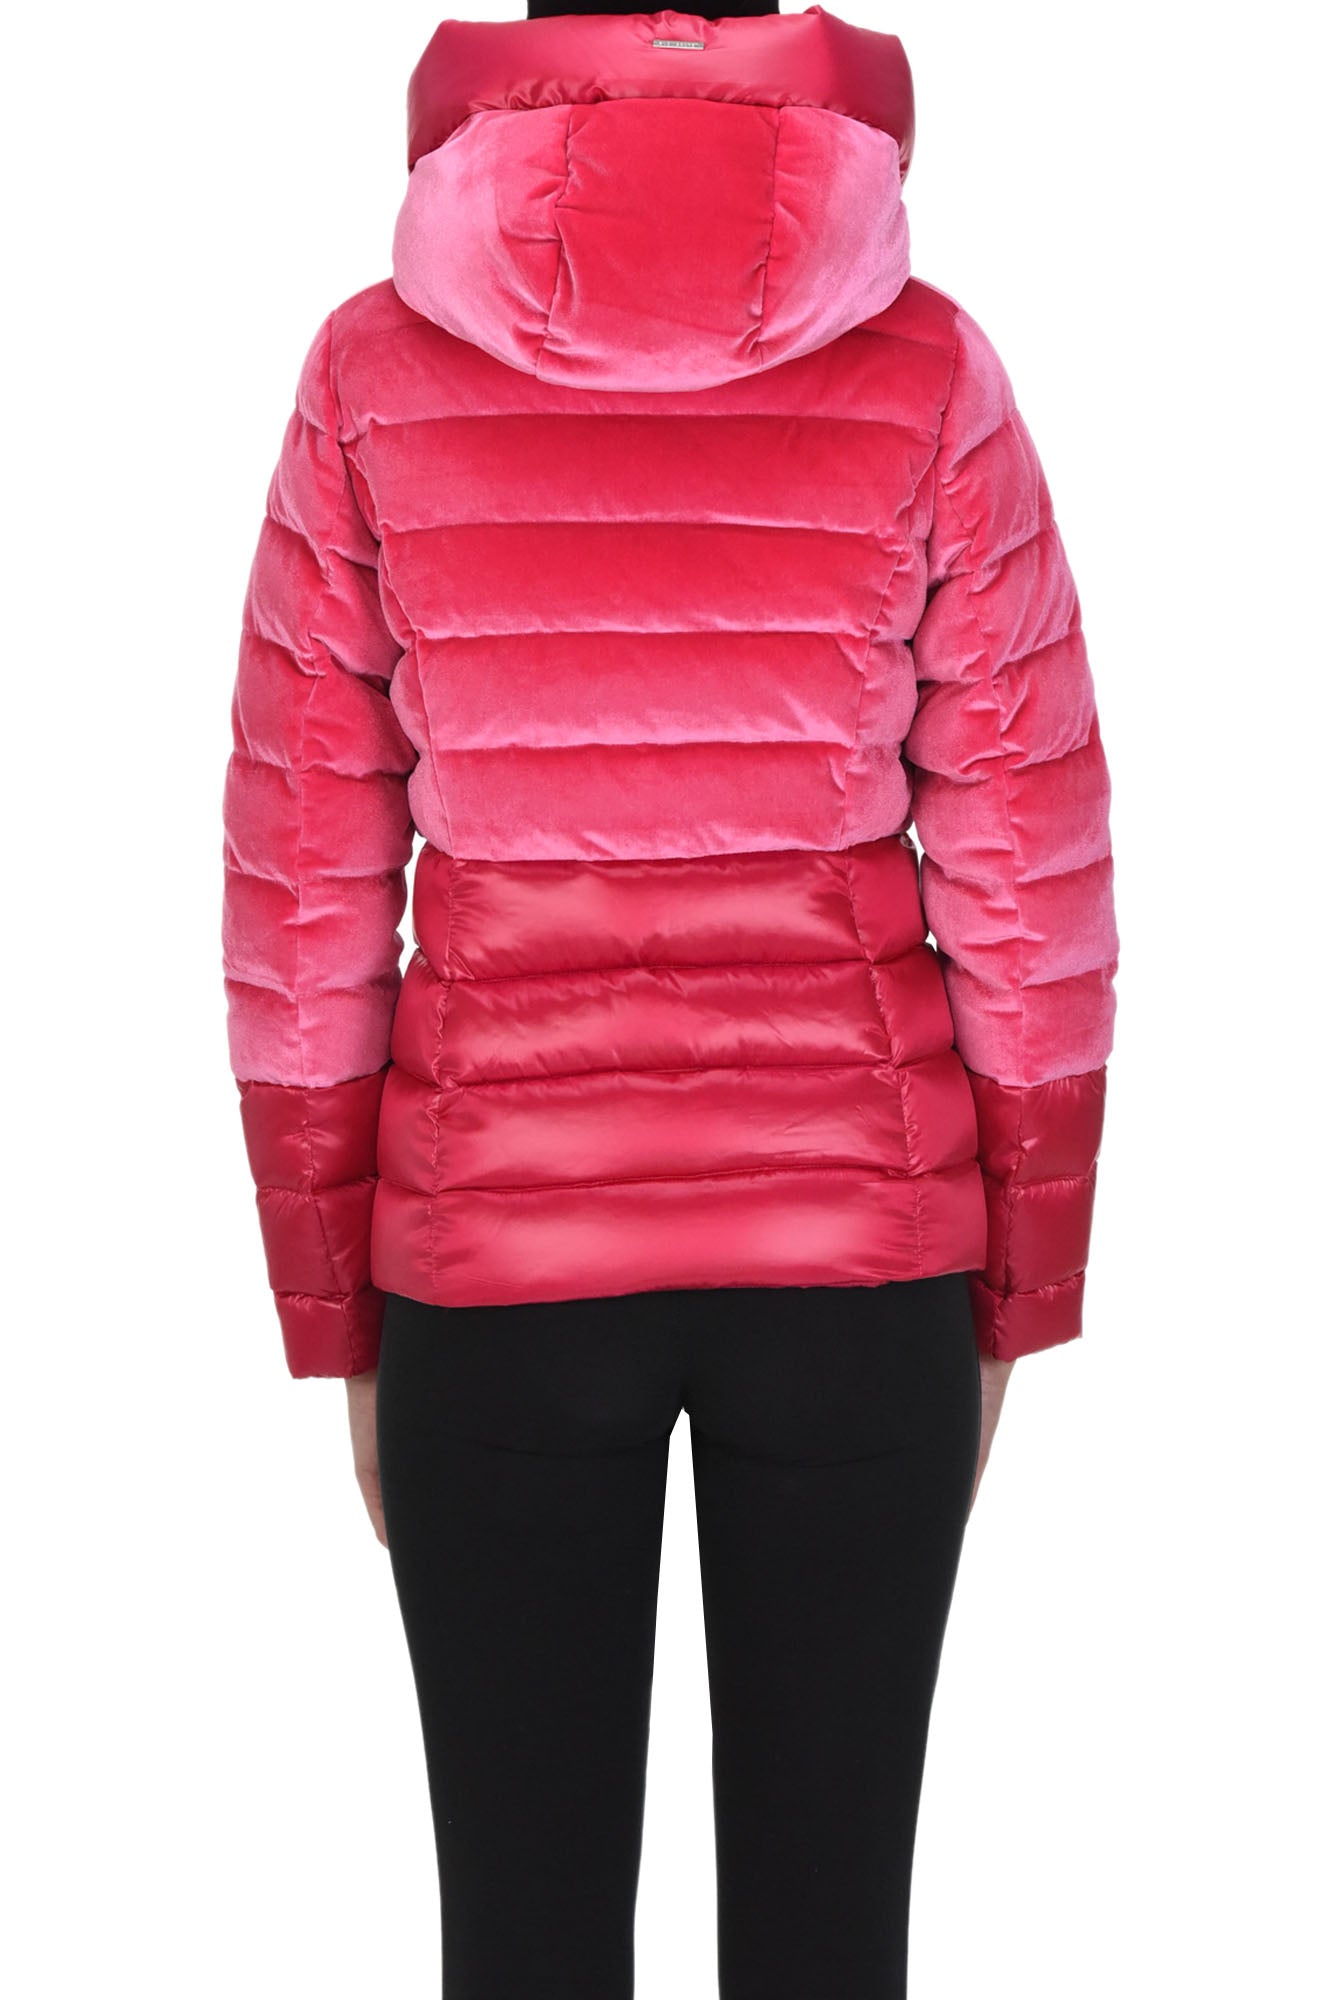 Snow Secret Women's Quilted Down Jacket